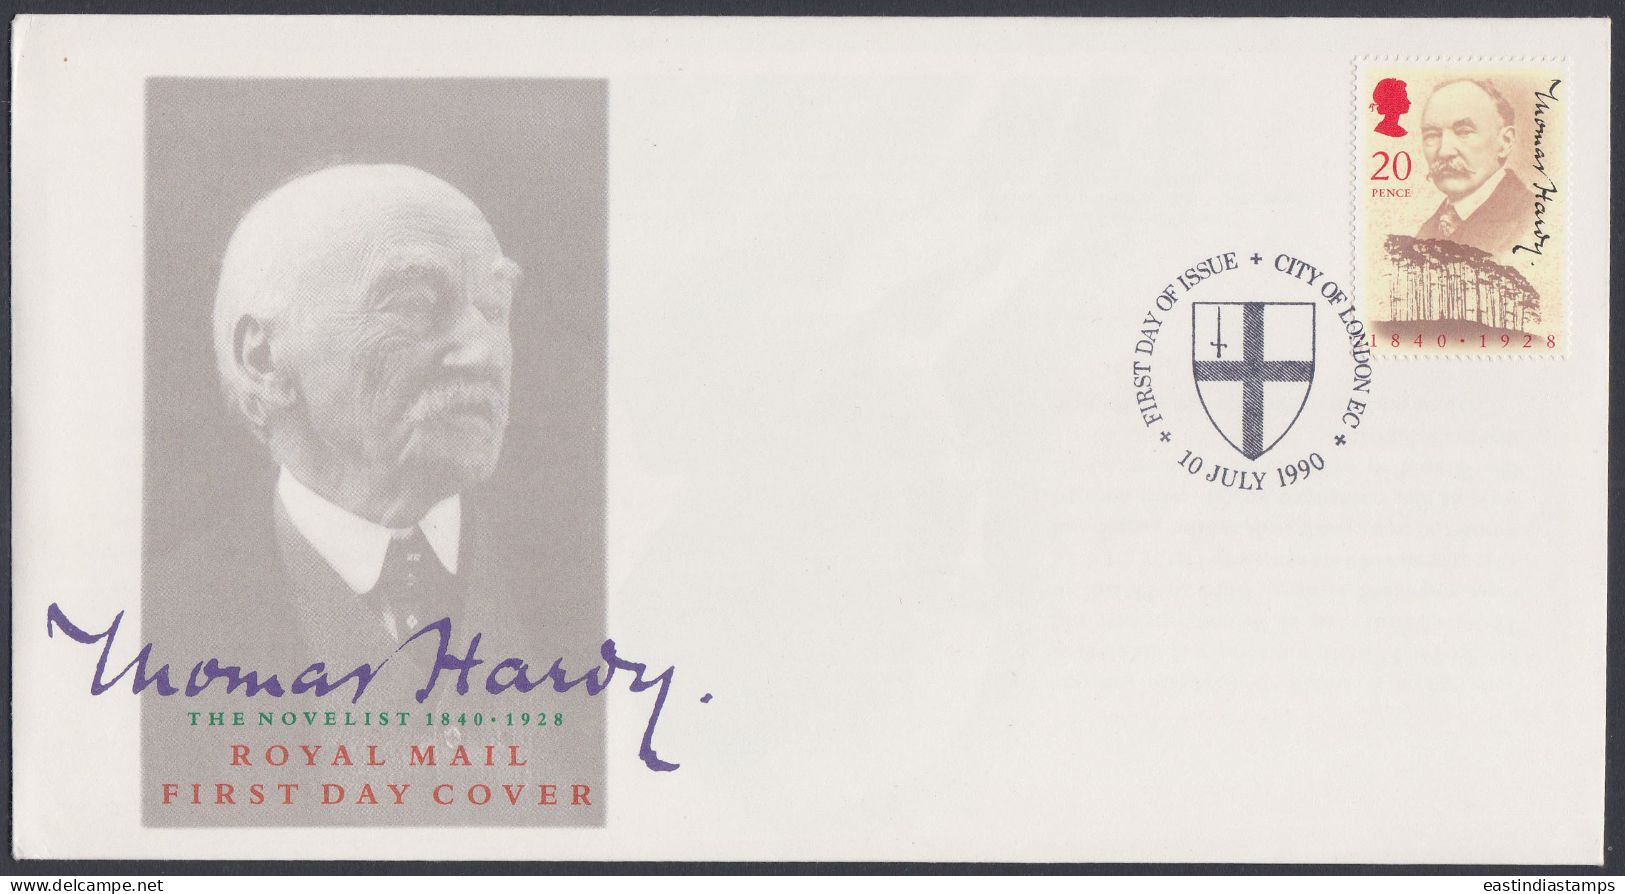 GB Great Britain 1990 FDC Thomas Hardy, Novelist, Novel, Literature, Art, Books, Pictorial Postmark, First Day Cover - Covers & Documents